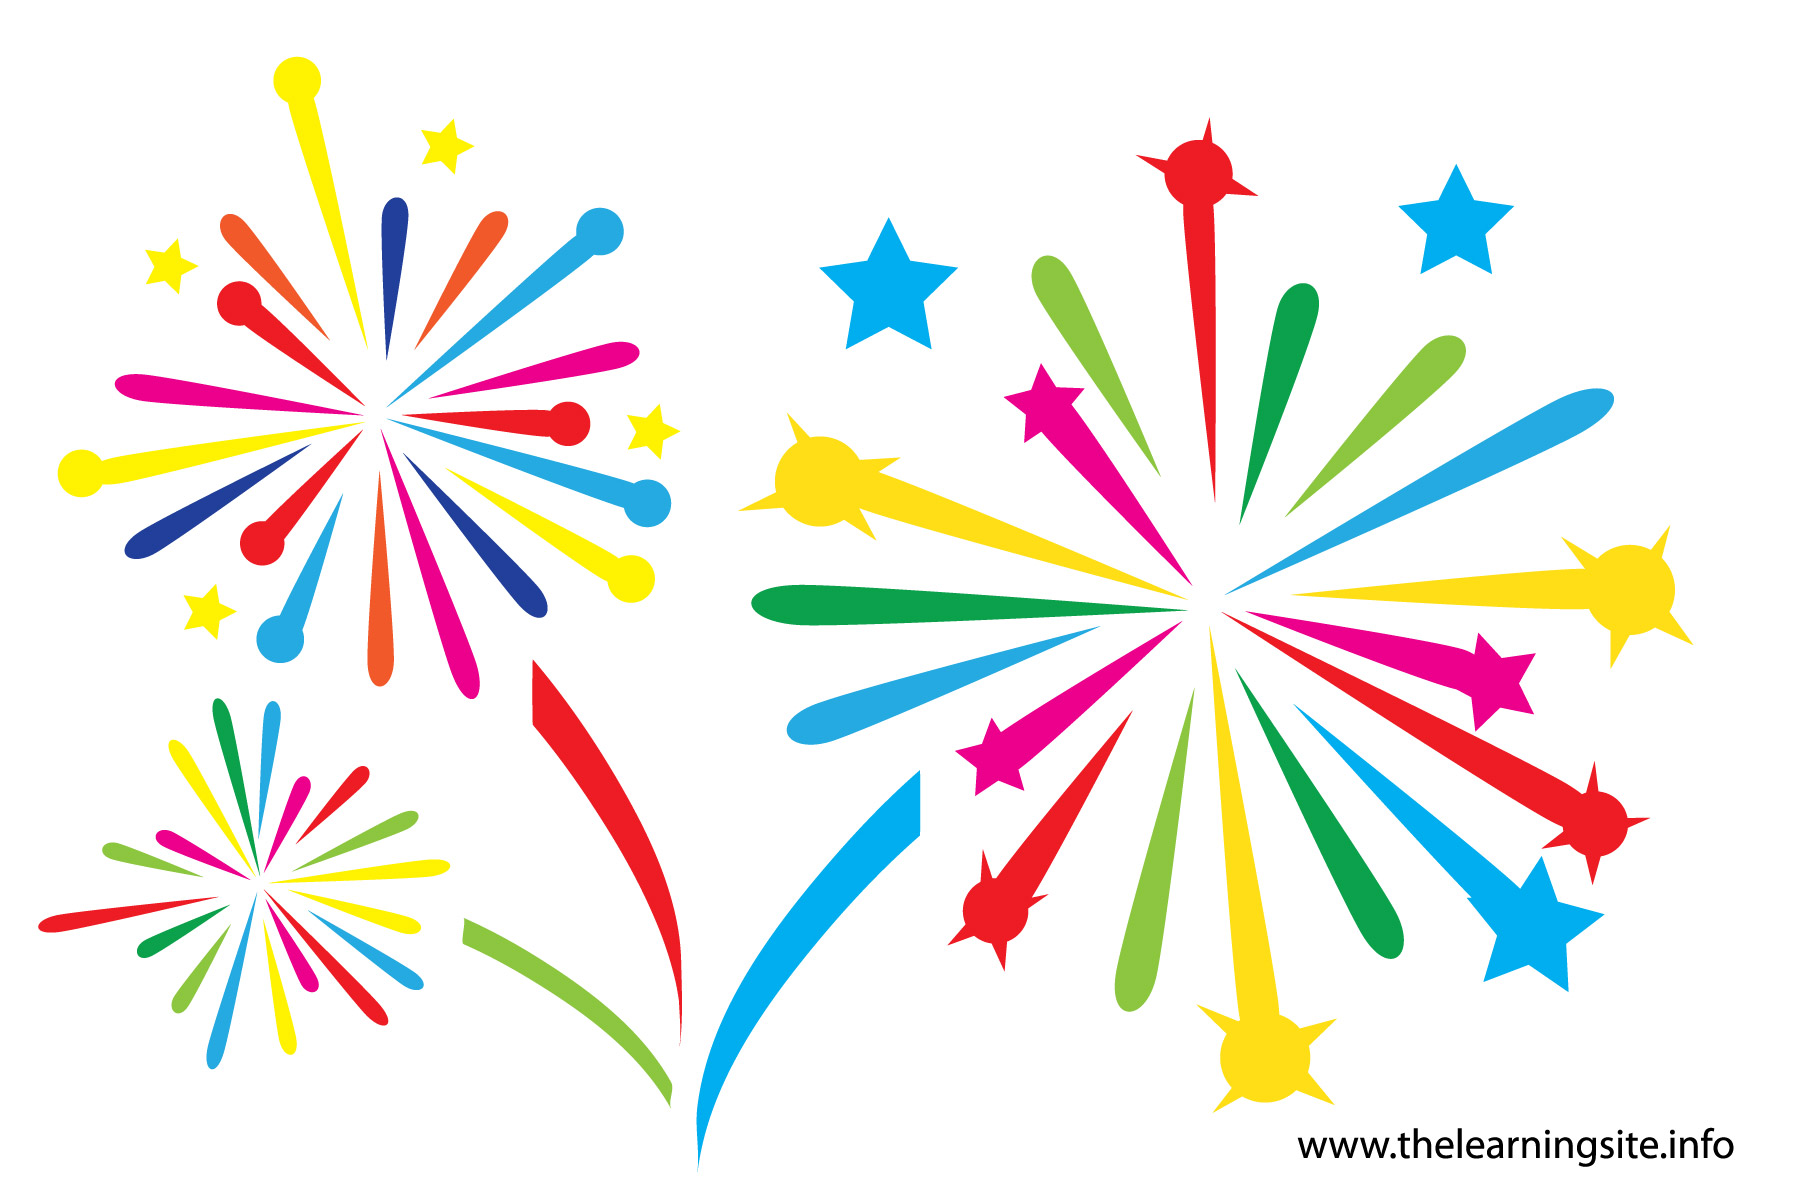 Fireworks clipart free clip art images image 7